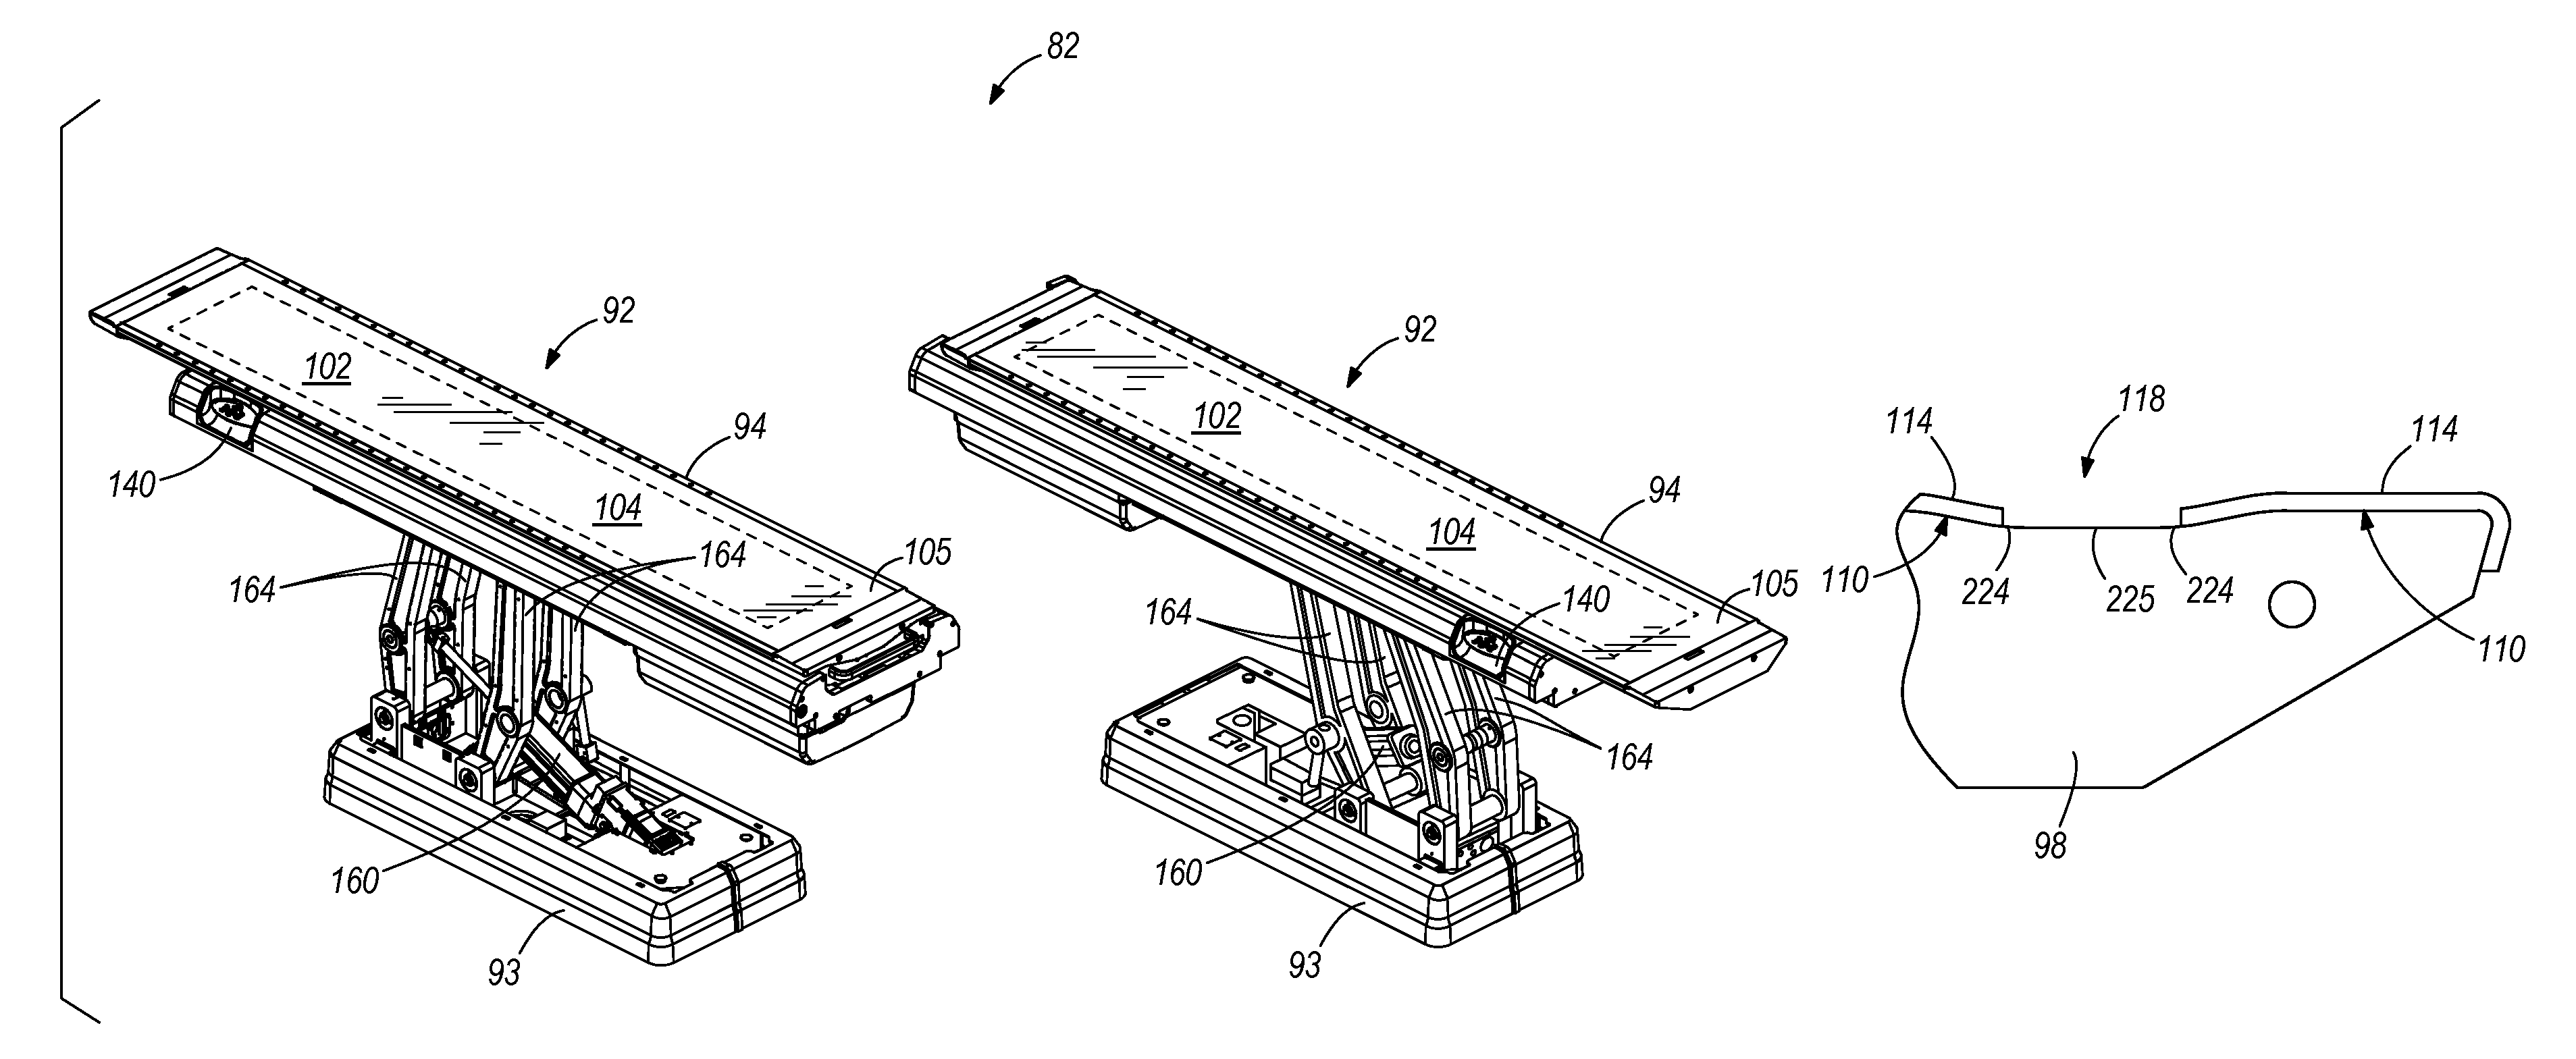 Patient support device with low attenuation properties